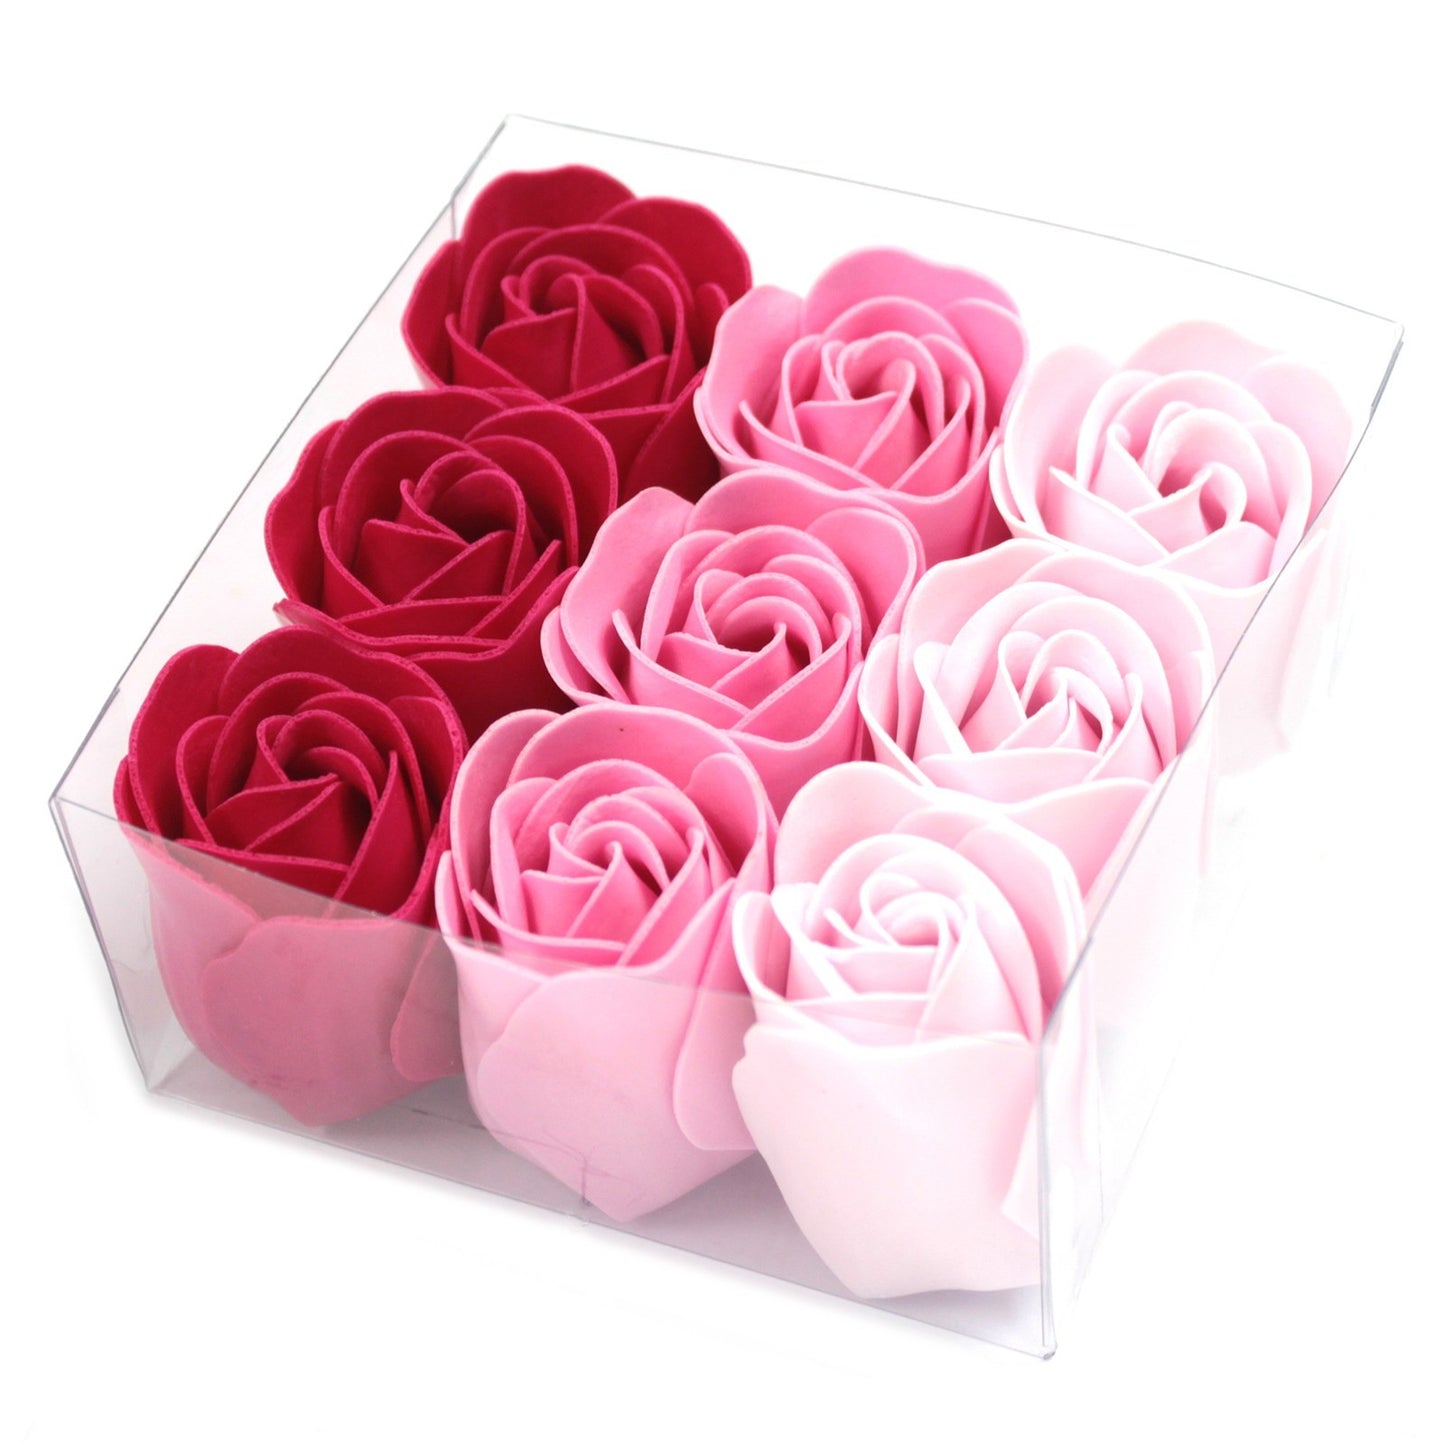 Set of 9 Soap Flowers - Pink Roses